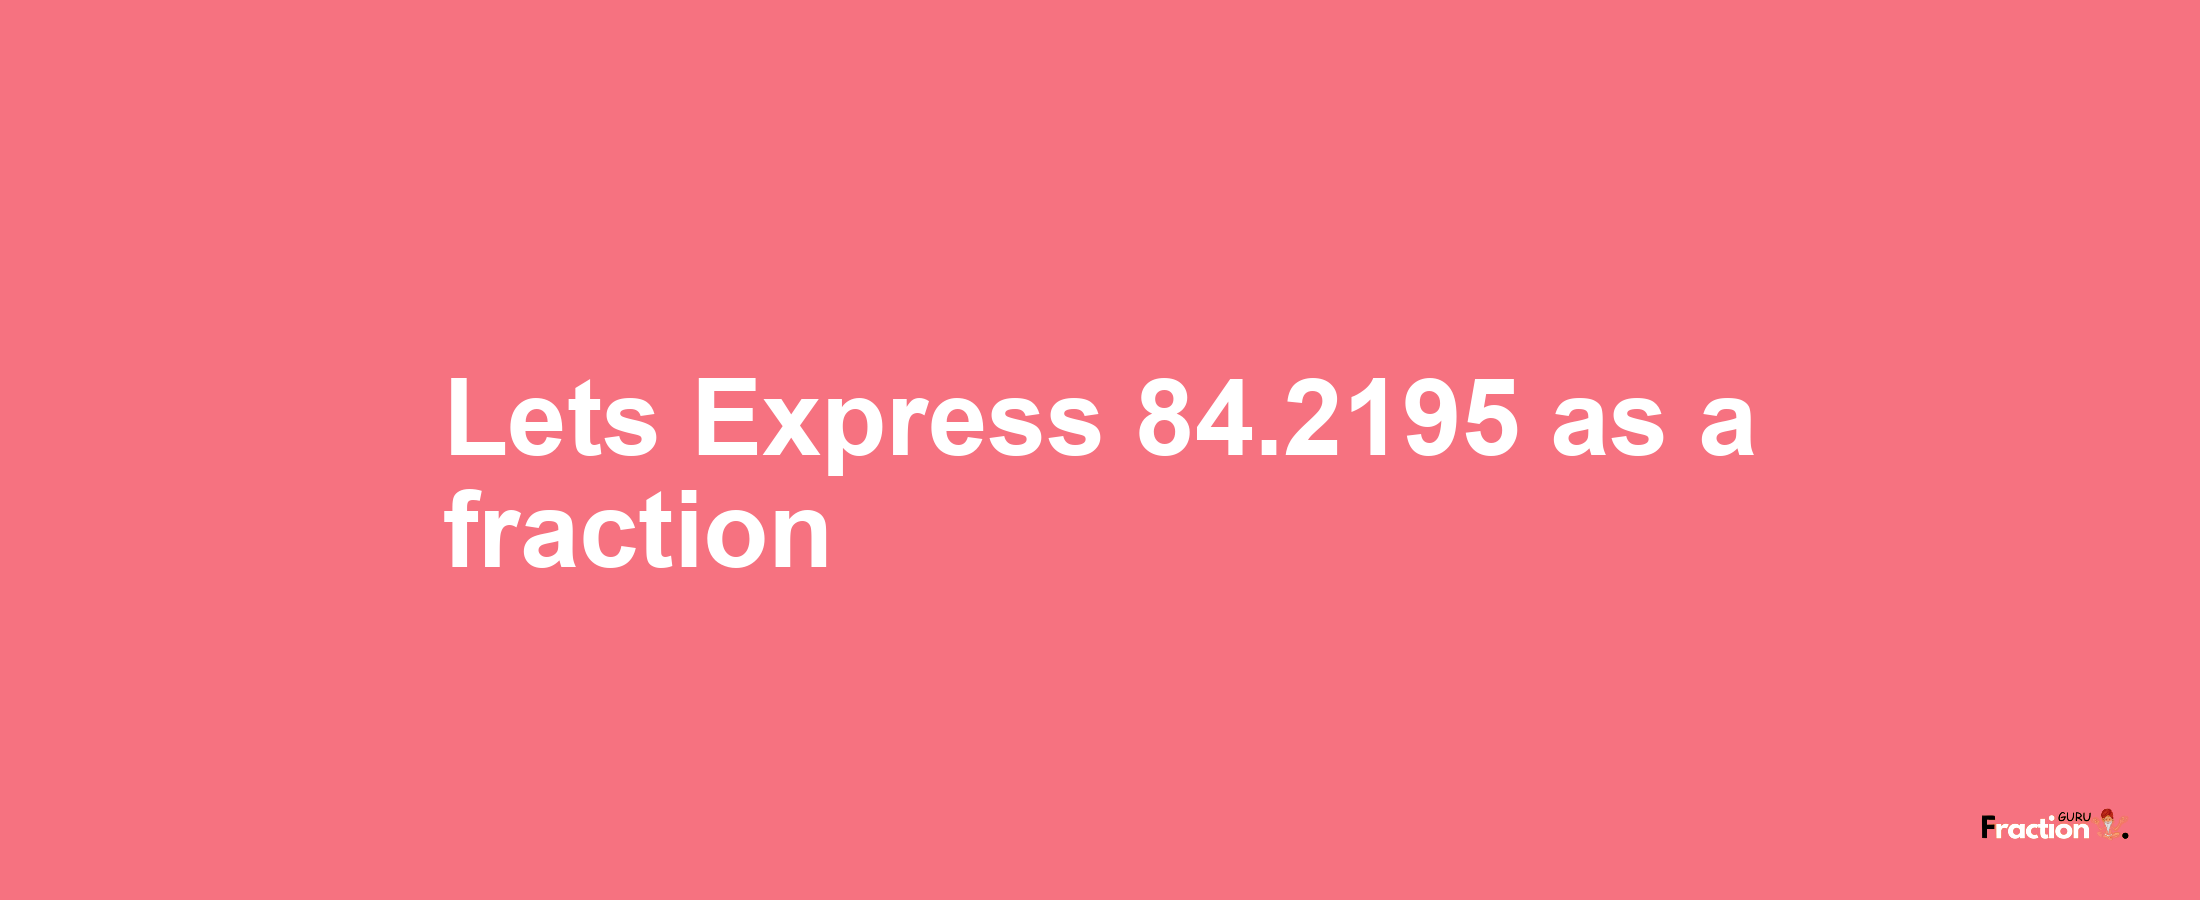 Lets Express 84.2195 as afraction